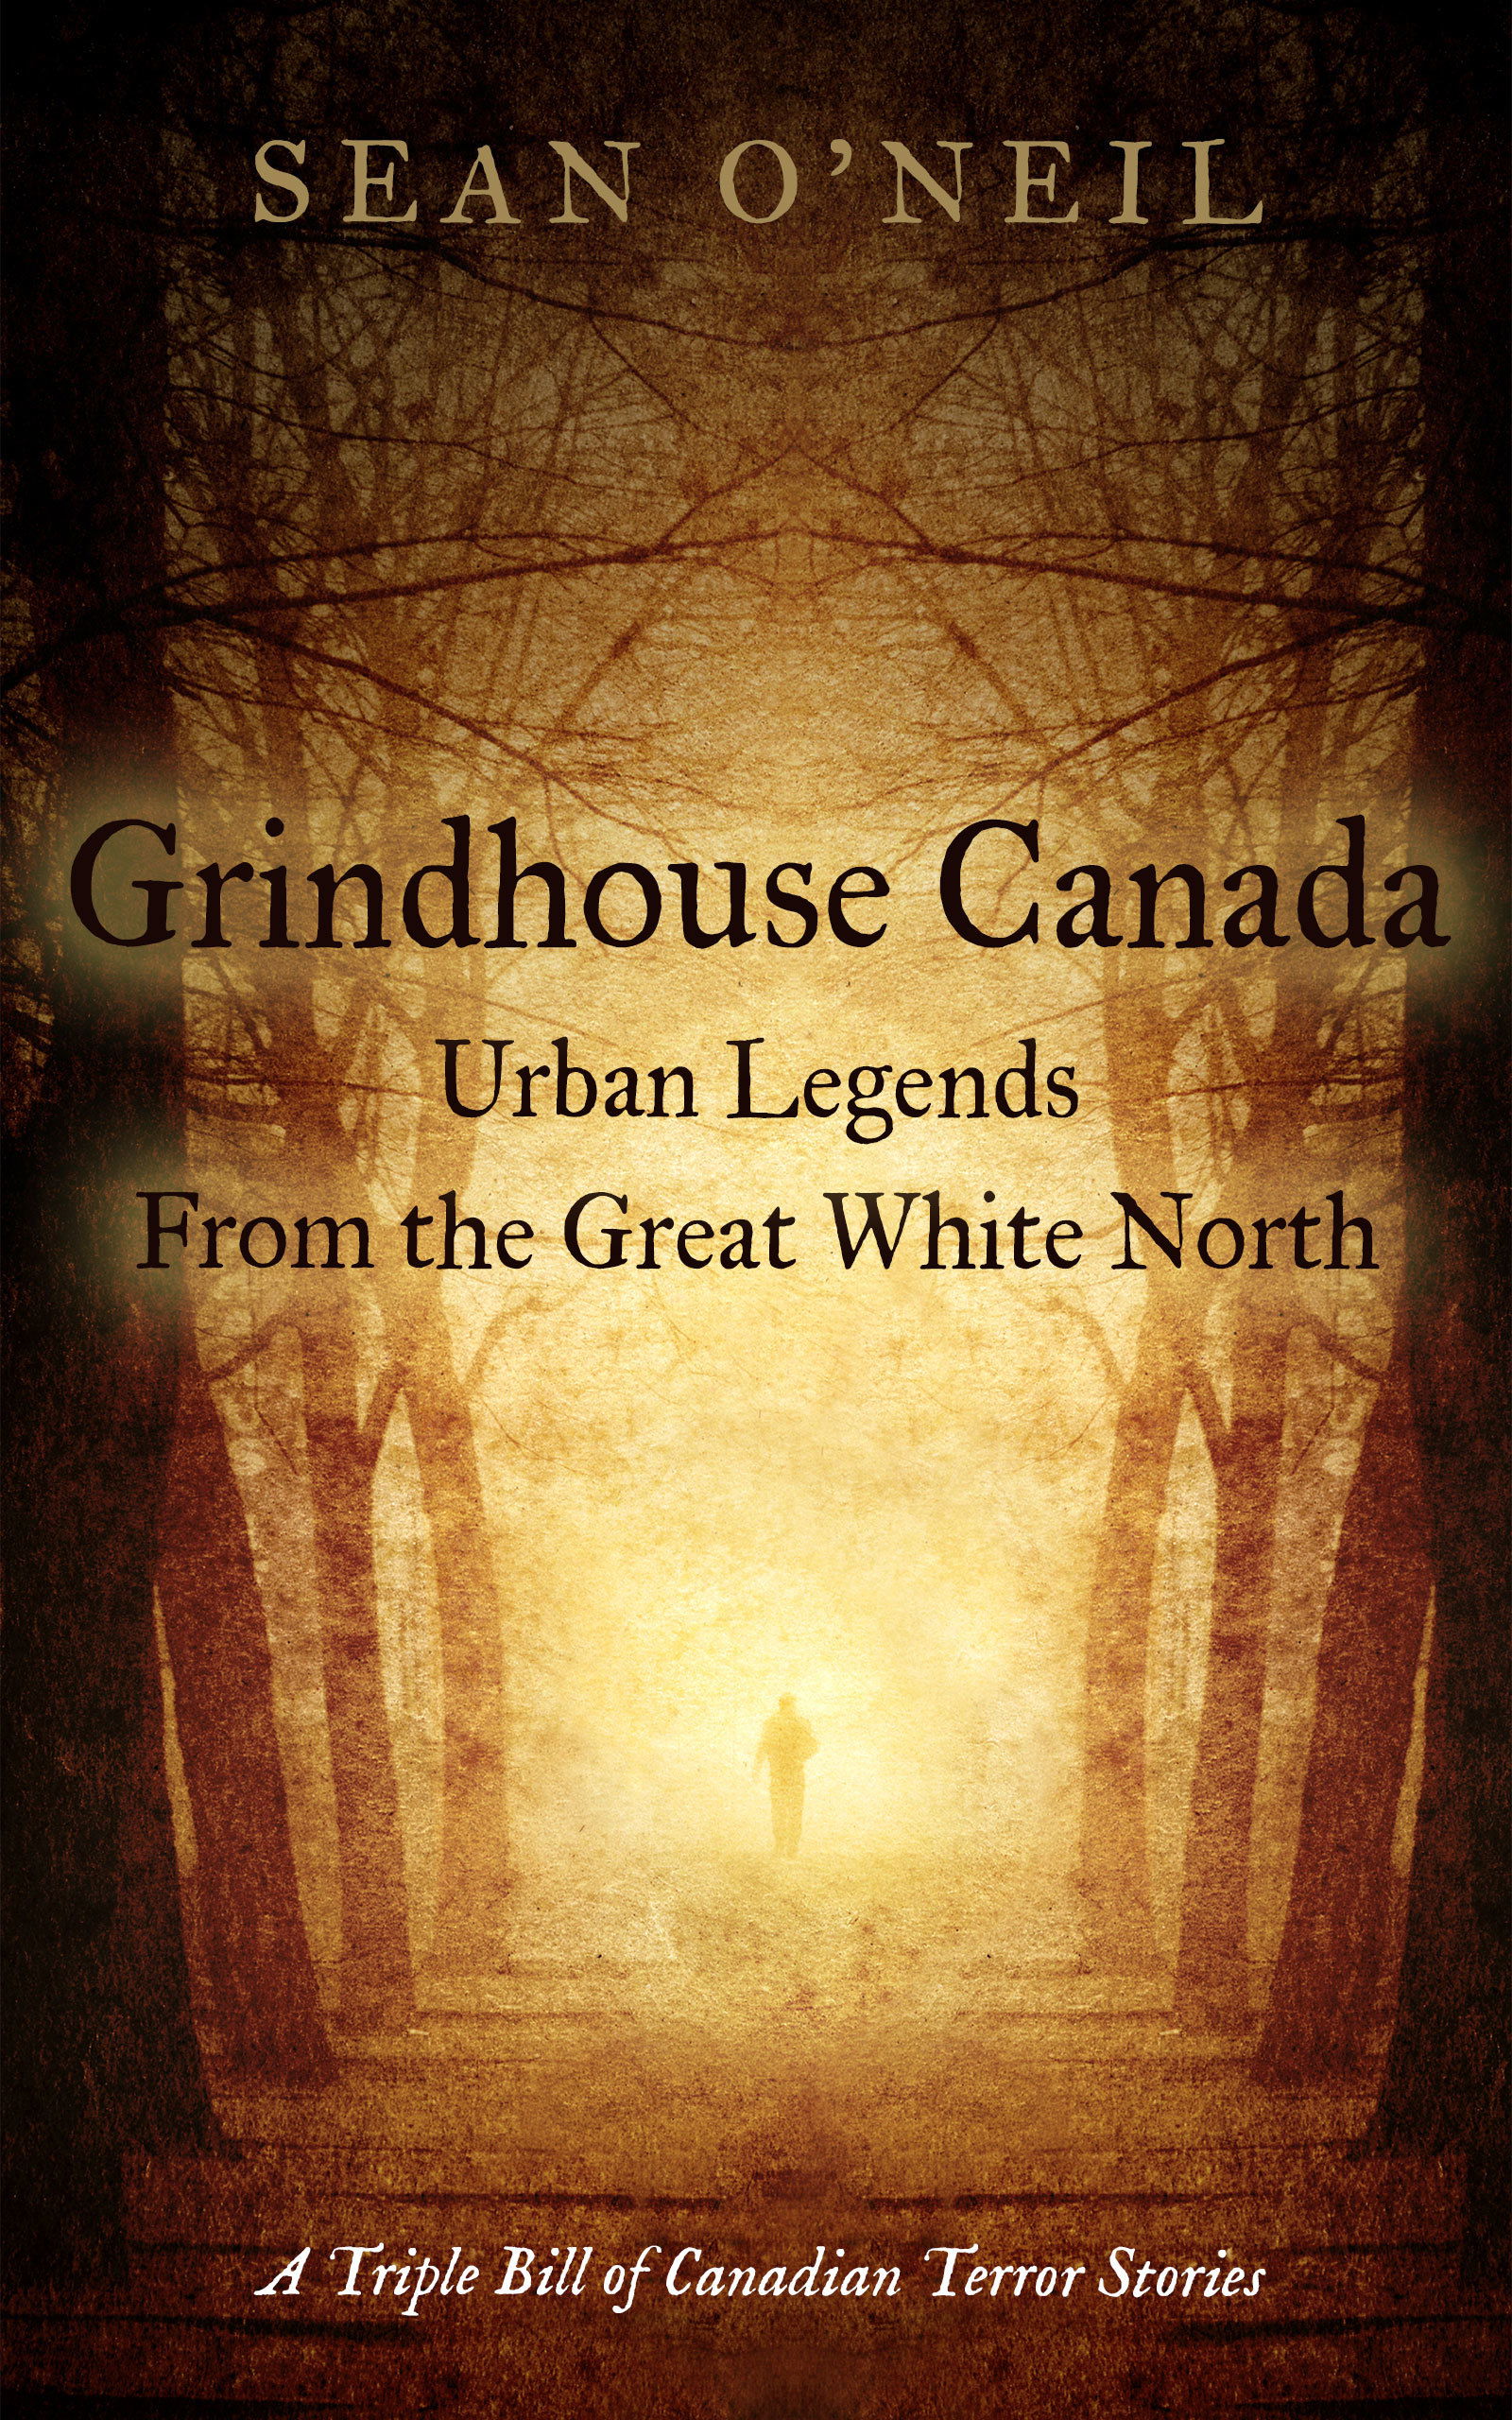 Grindhouse Canada Urban Legends from the Great White North